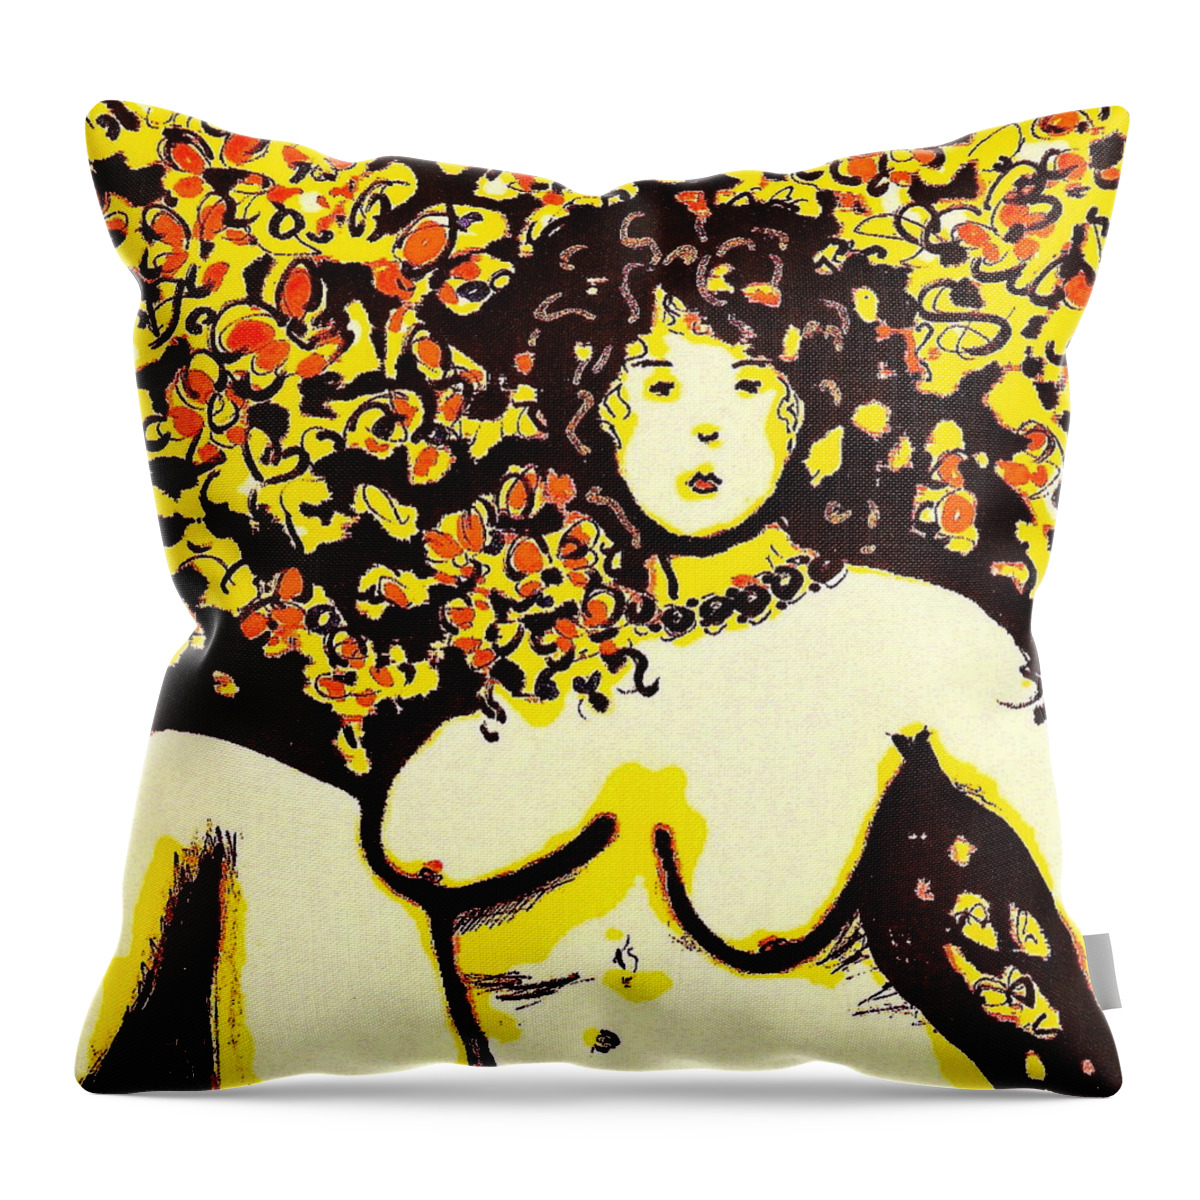 Woman Throw Pillow featuring the painting Erotic Desire by Natalie Holland